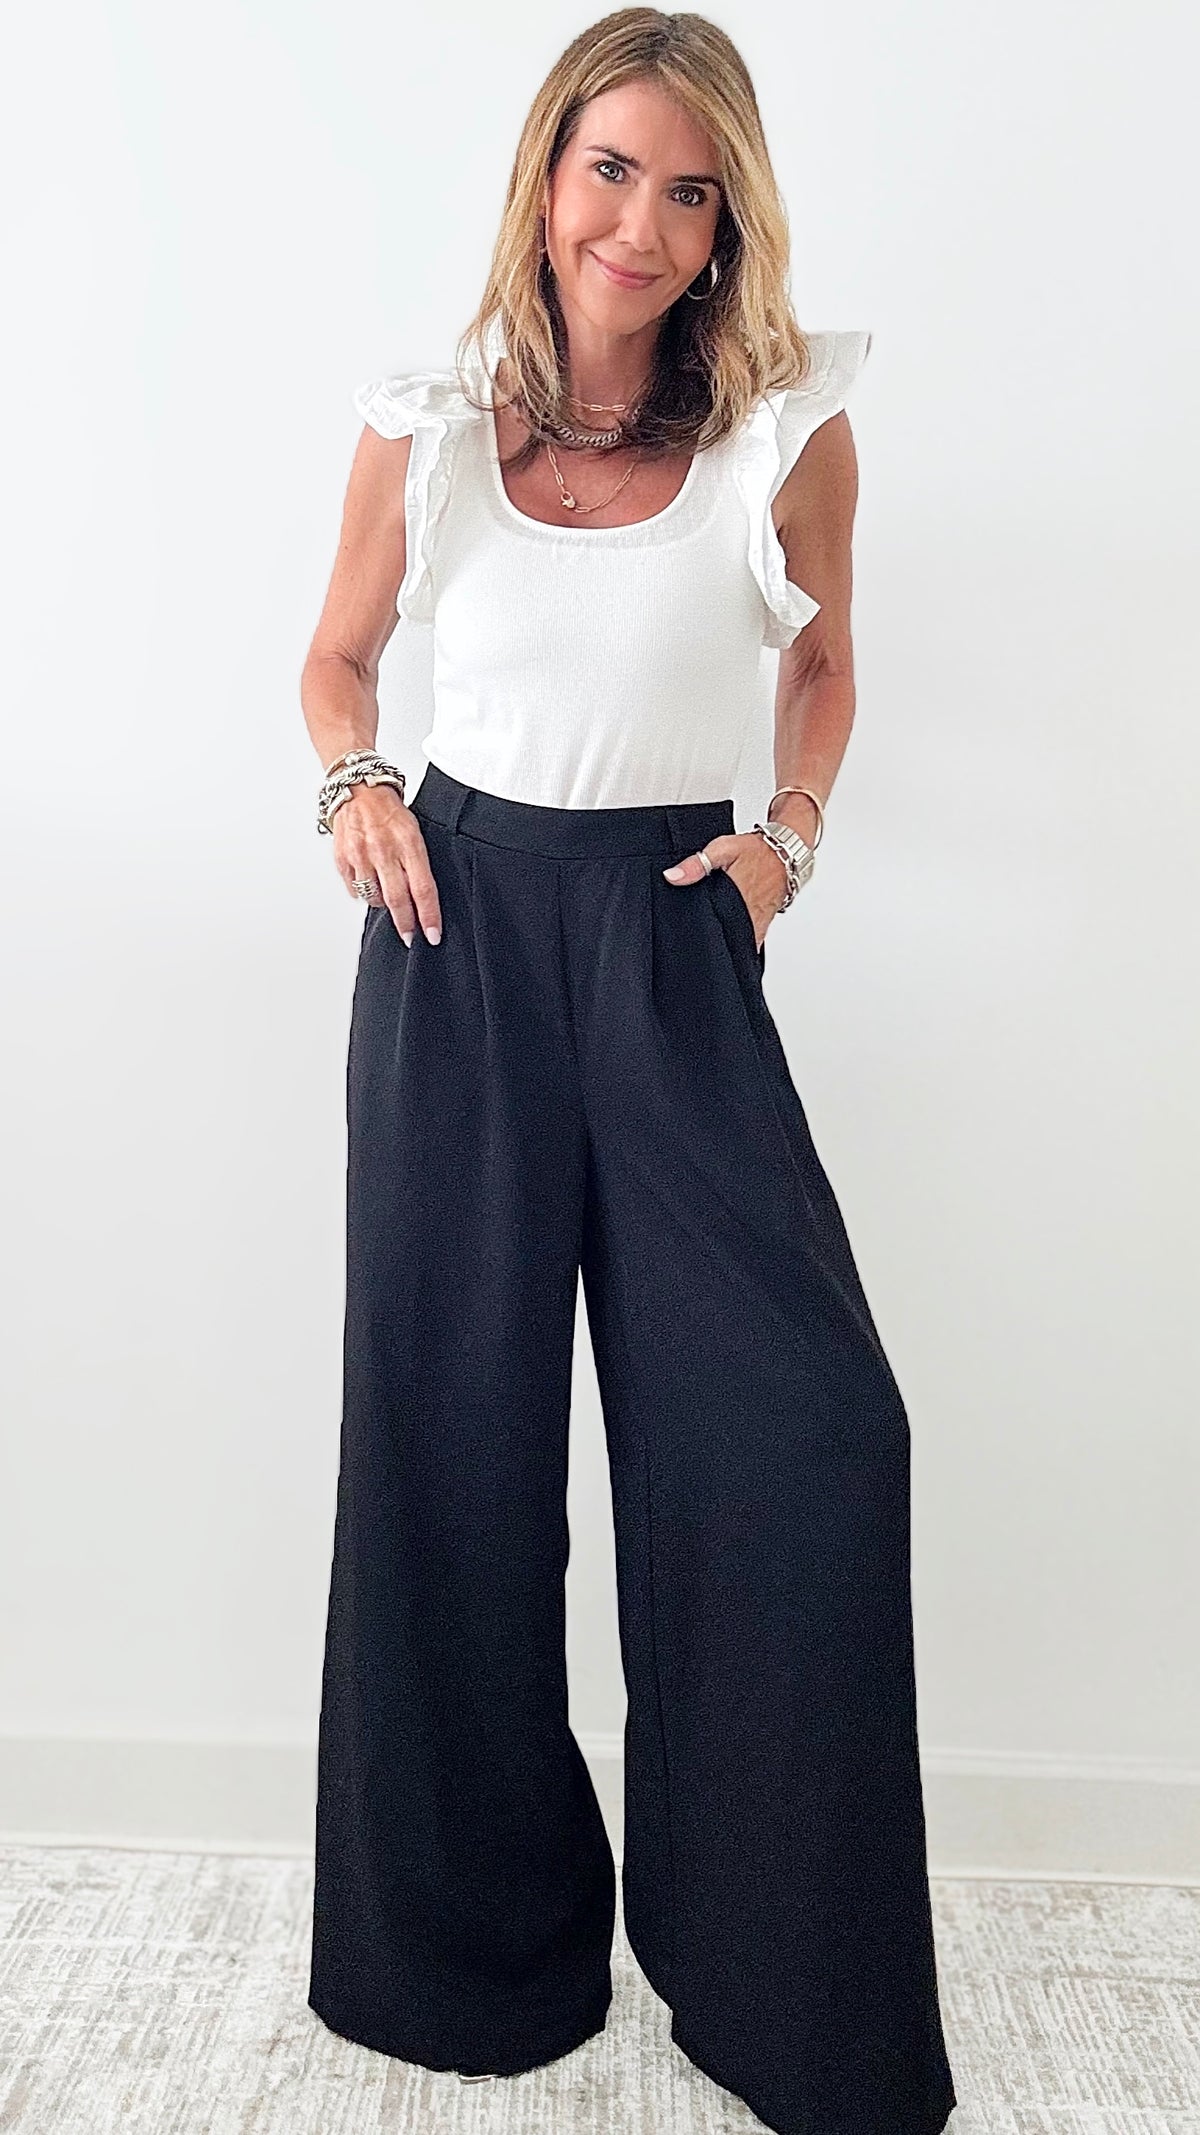 Pleated Solid Pants - Black-170 Bottoms-EESOME-Coastal Bloom Boutique, find the trendiest versions of the popular styles and looks Located in Indialantic, FL